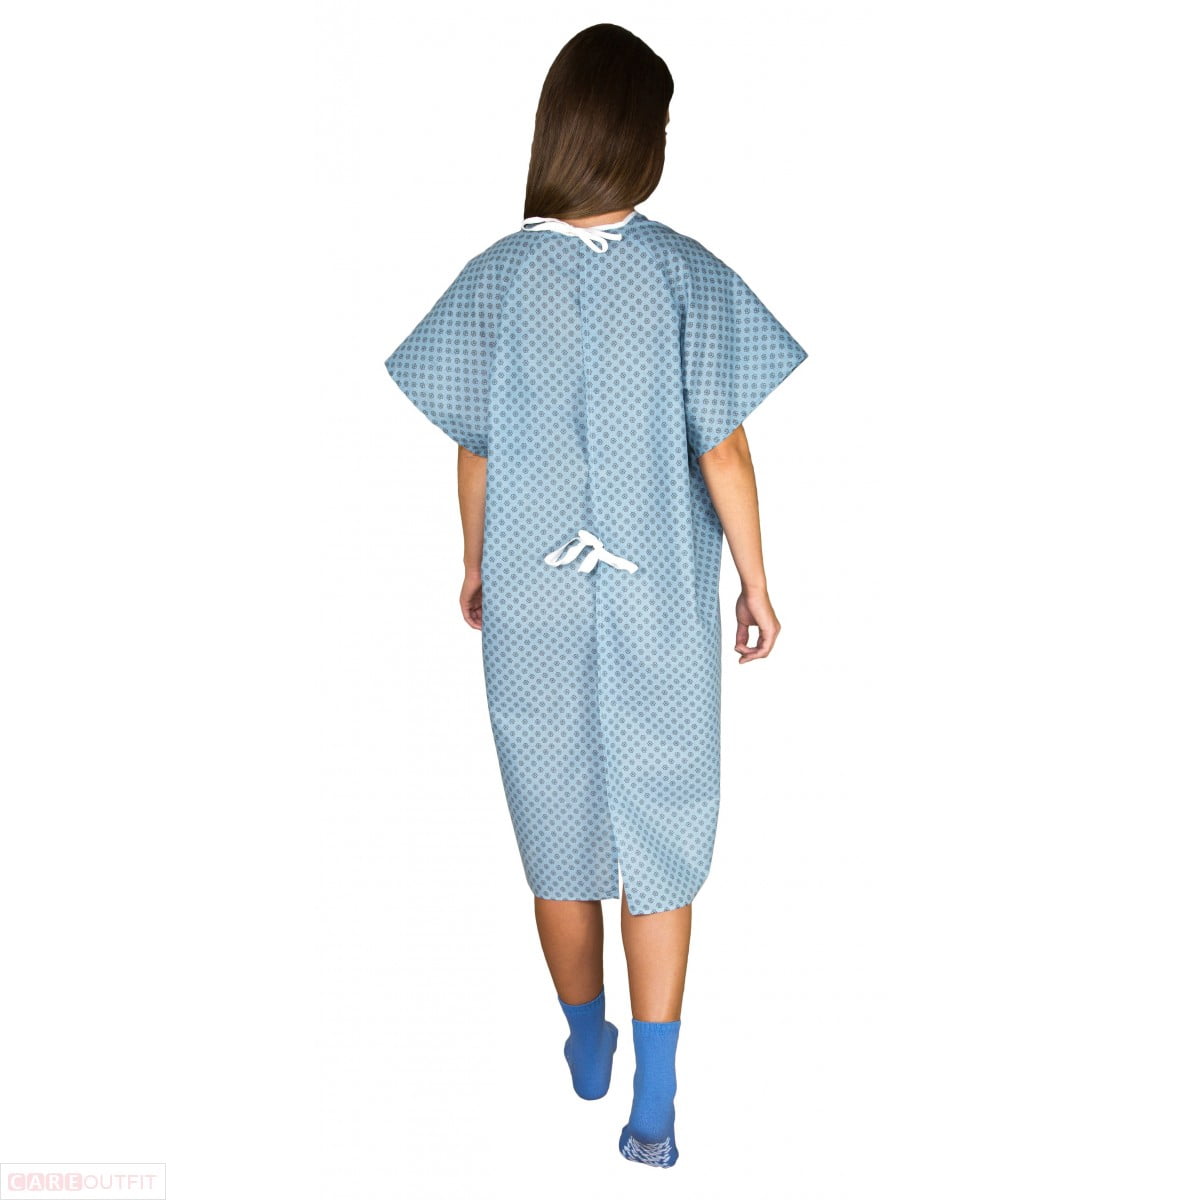 Hospital outfit | Mankaia, medical clothing